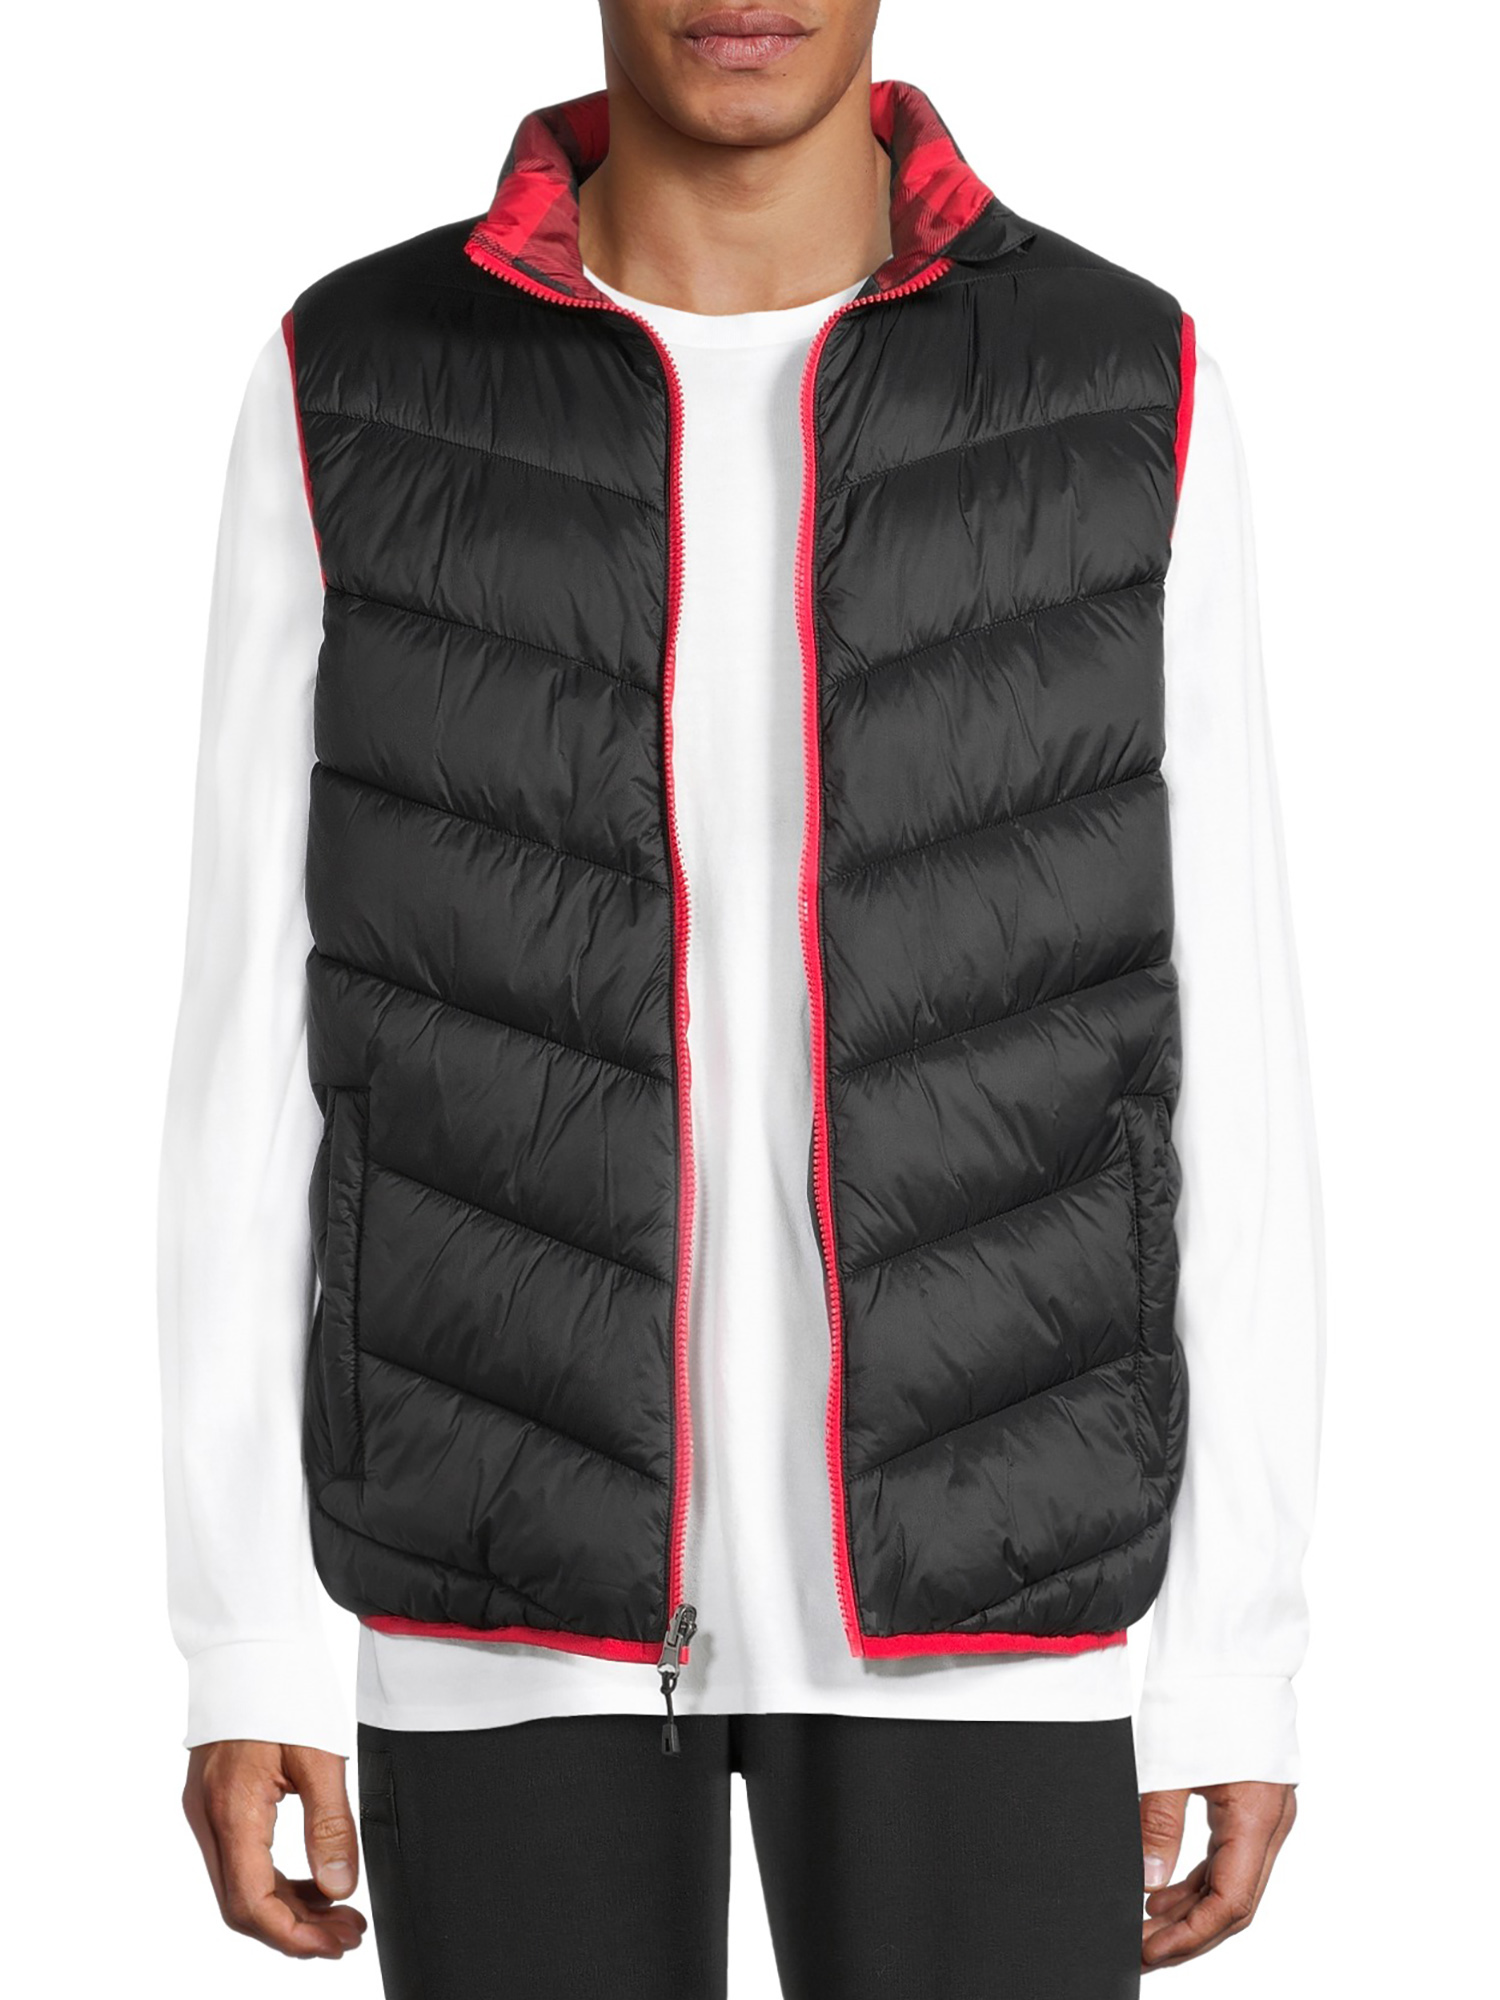 Swiss Tech Men's Reversible Puffer Vest, Up to Size 3XL - image 1 of 4